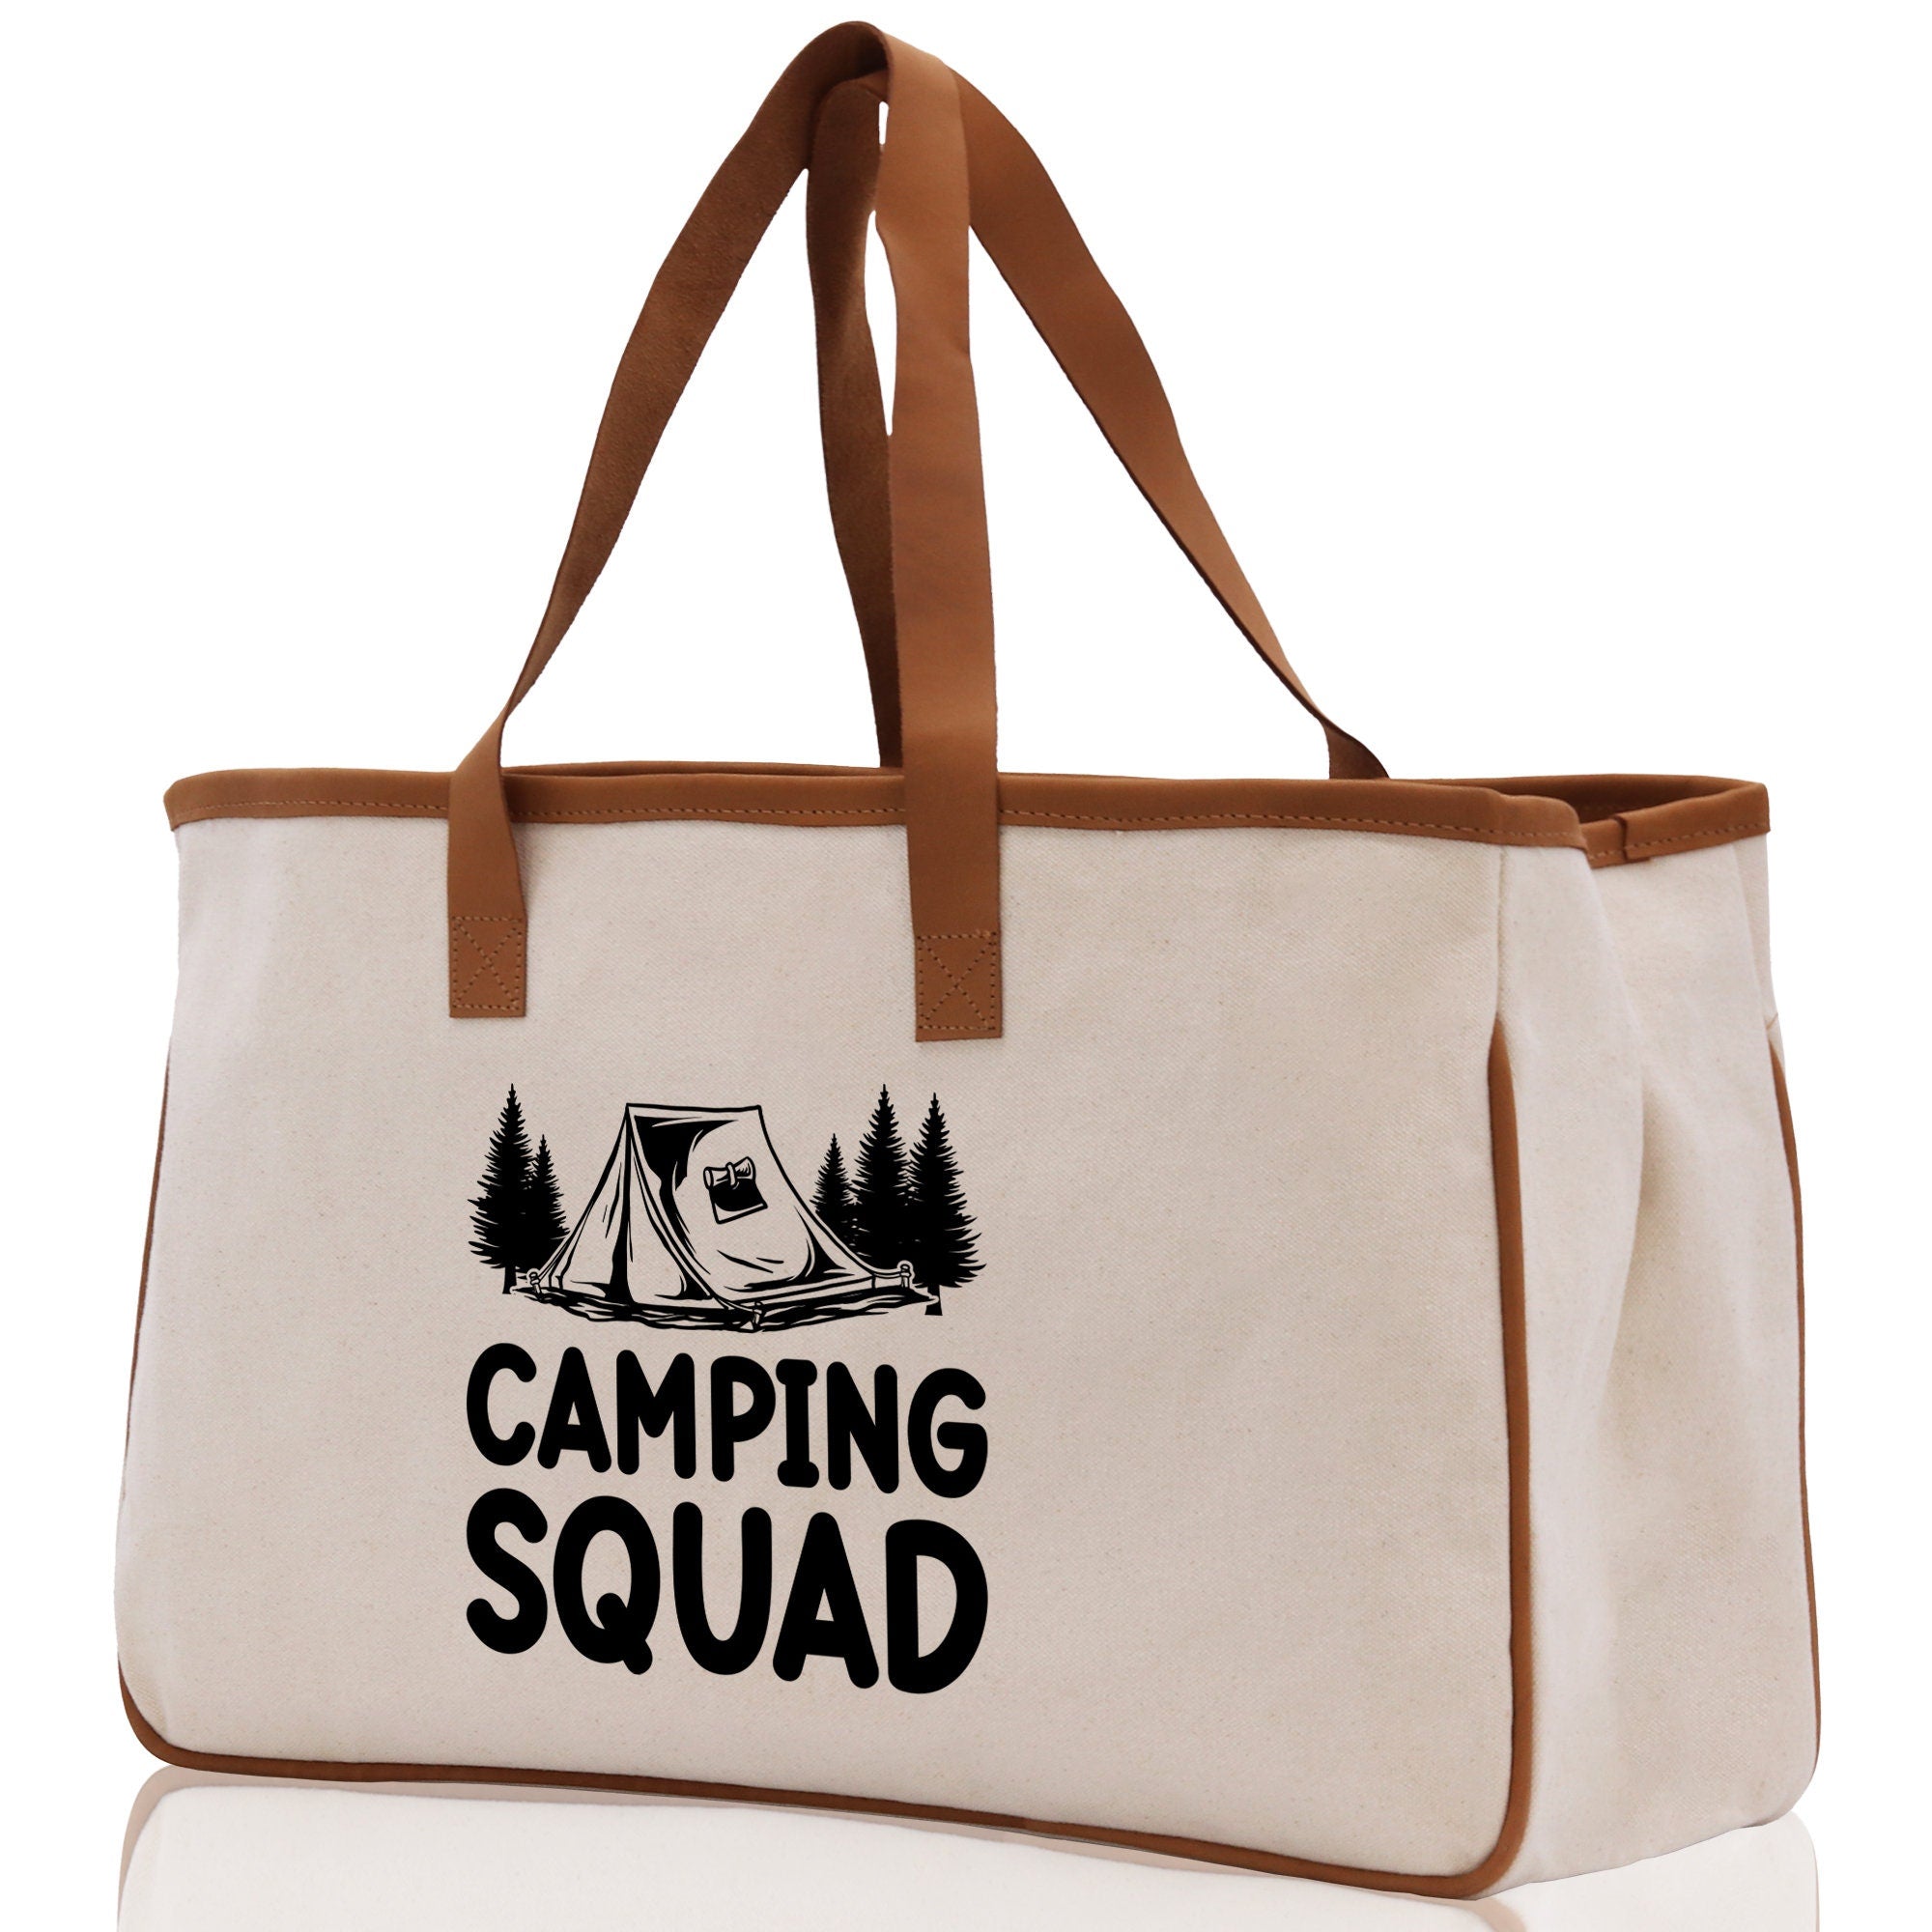 Camping Squad Cotton Canvas Chic Tote Bag Camping Tote Camping Lover Gift Tote Bag Outdoor Tote Weekender Tote Camper Tote Multipurpose Tote